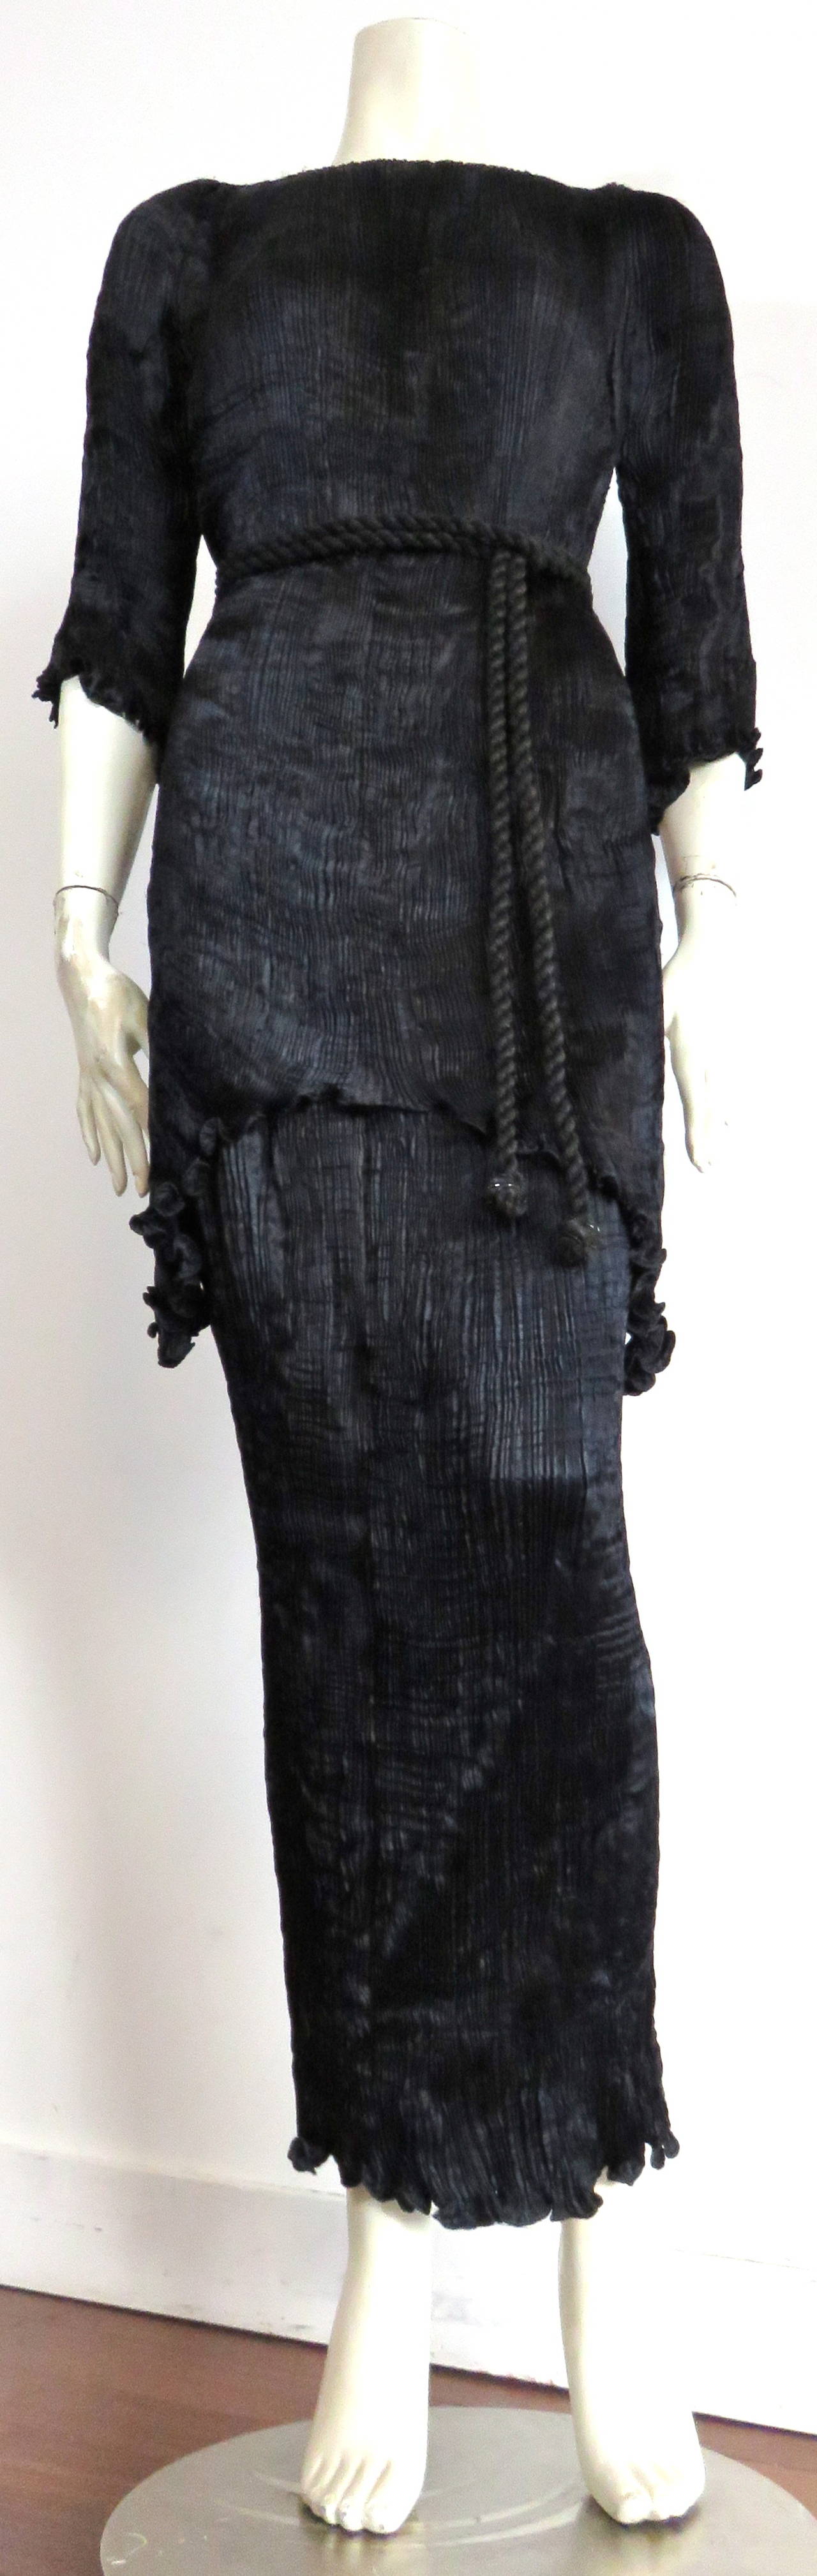 Excellent/mint condition, 1980's PATRICIA LESTER, black Fortuny-pleated Peplos dress.

This gorgeous set includes tunic top with bugle beaded neckline, long slim skirt with elasticated/stretchy waistband,  hand-beaded 'rope' belt, and silk storage